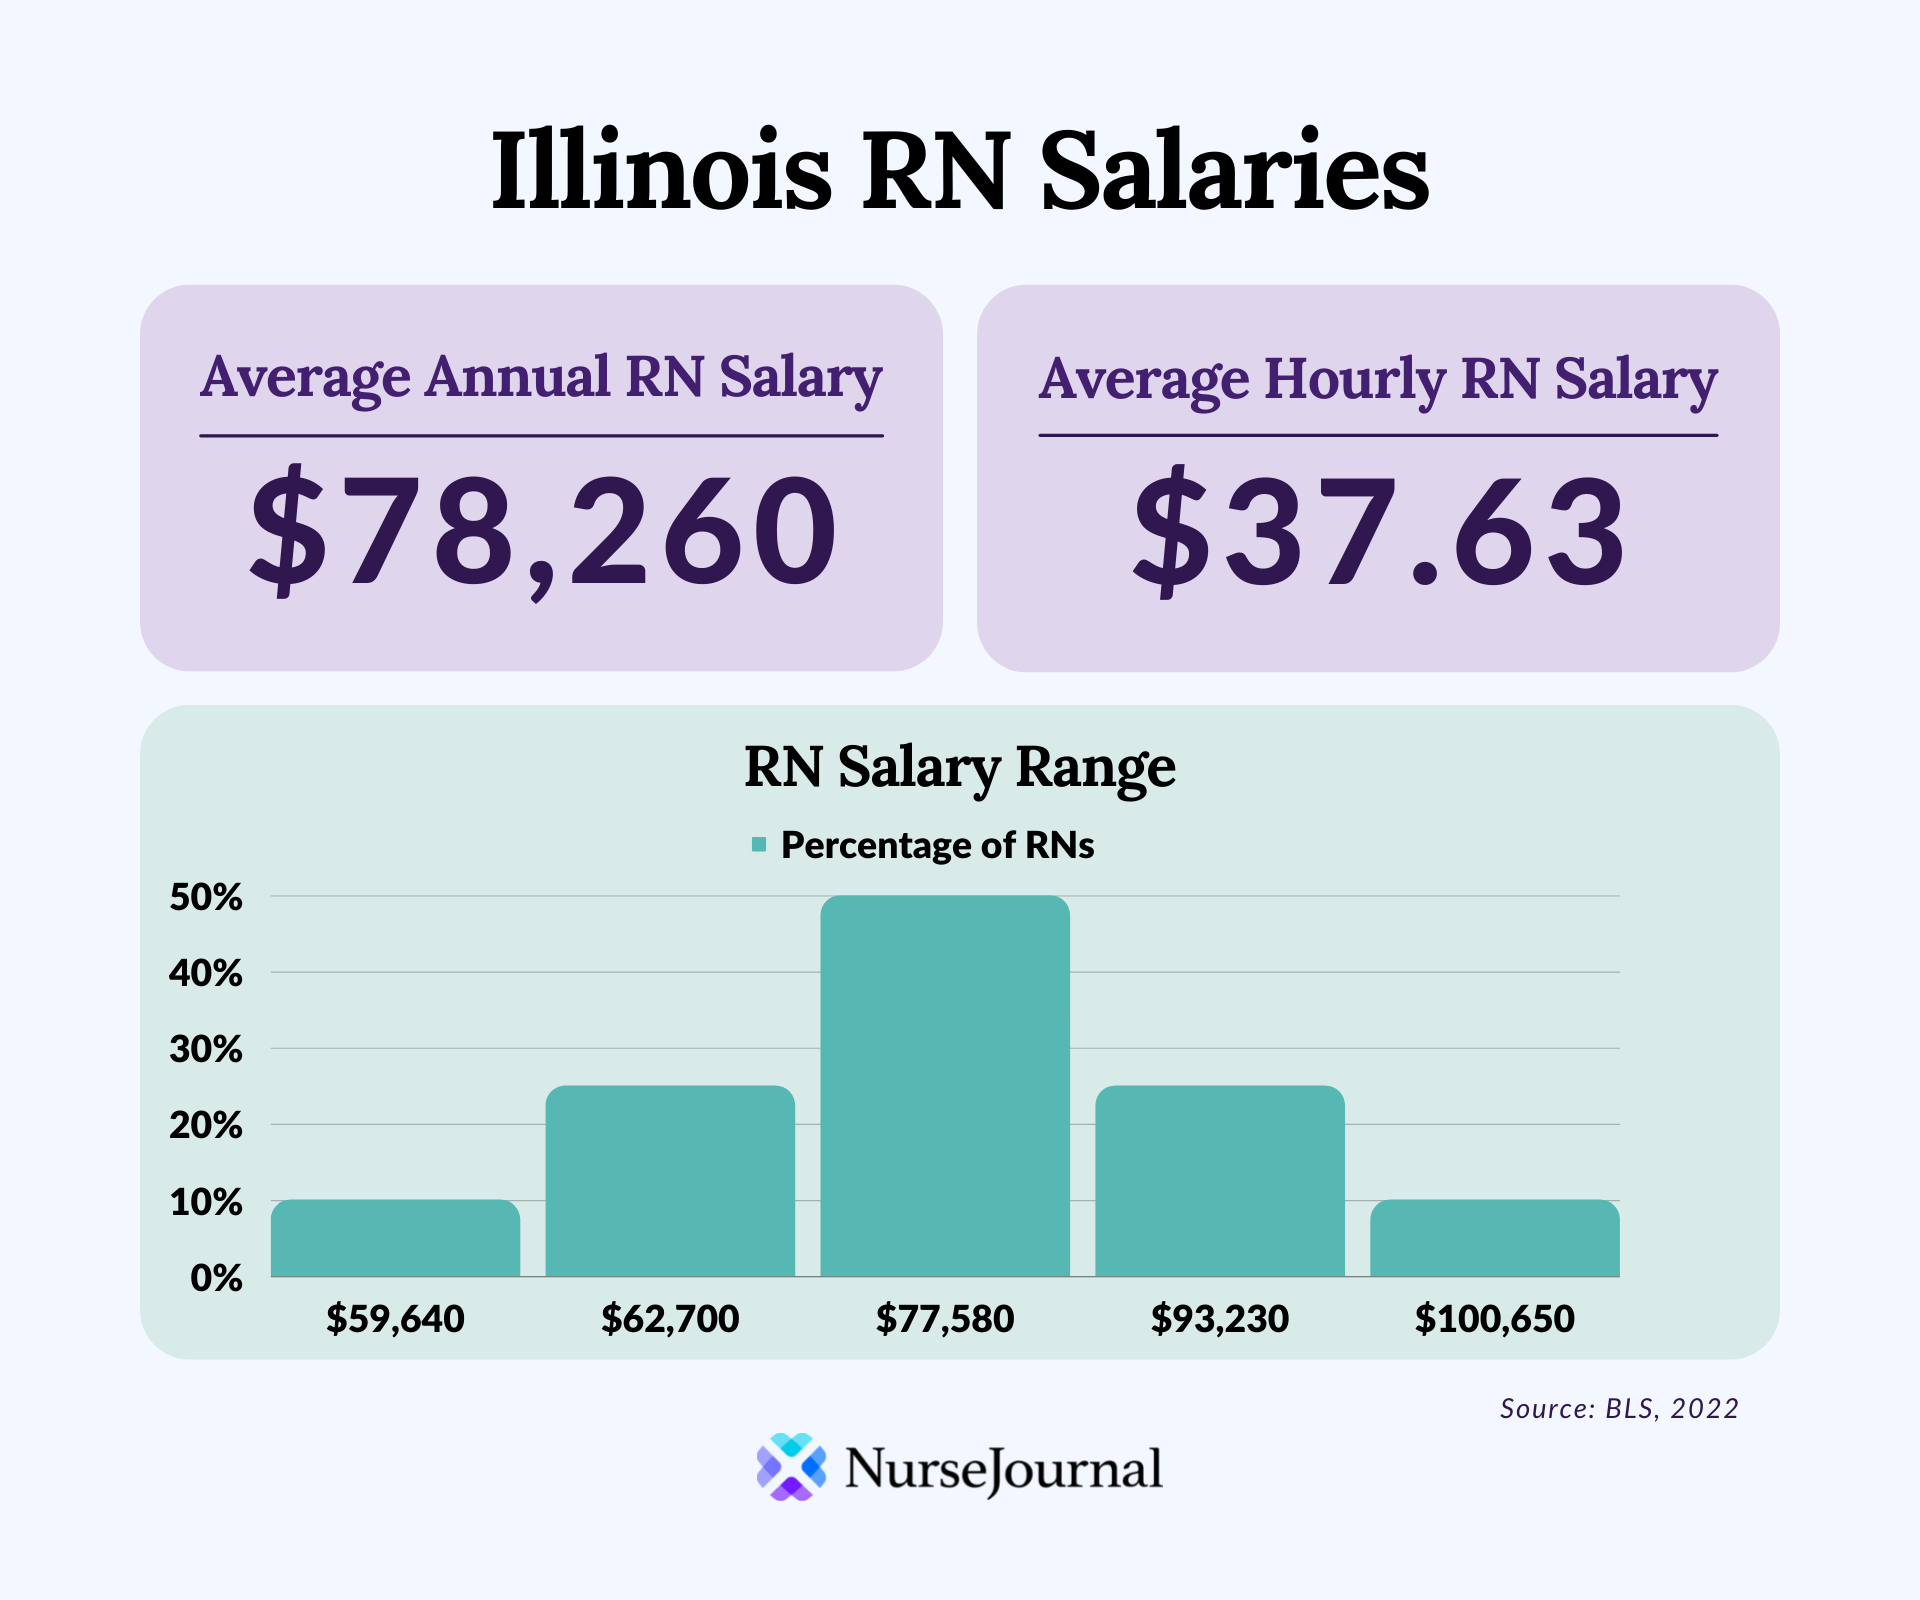 Infographic of registered nursing salary data in Illinois. The average annual RN salary is $78,260. The average hourly RN salary is $37.63. Average RN salaries range from 59640 among the bottom 10th percentile of earners to $100,650 among the top 90th percentile of earners.